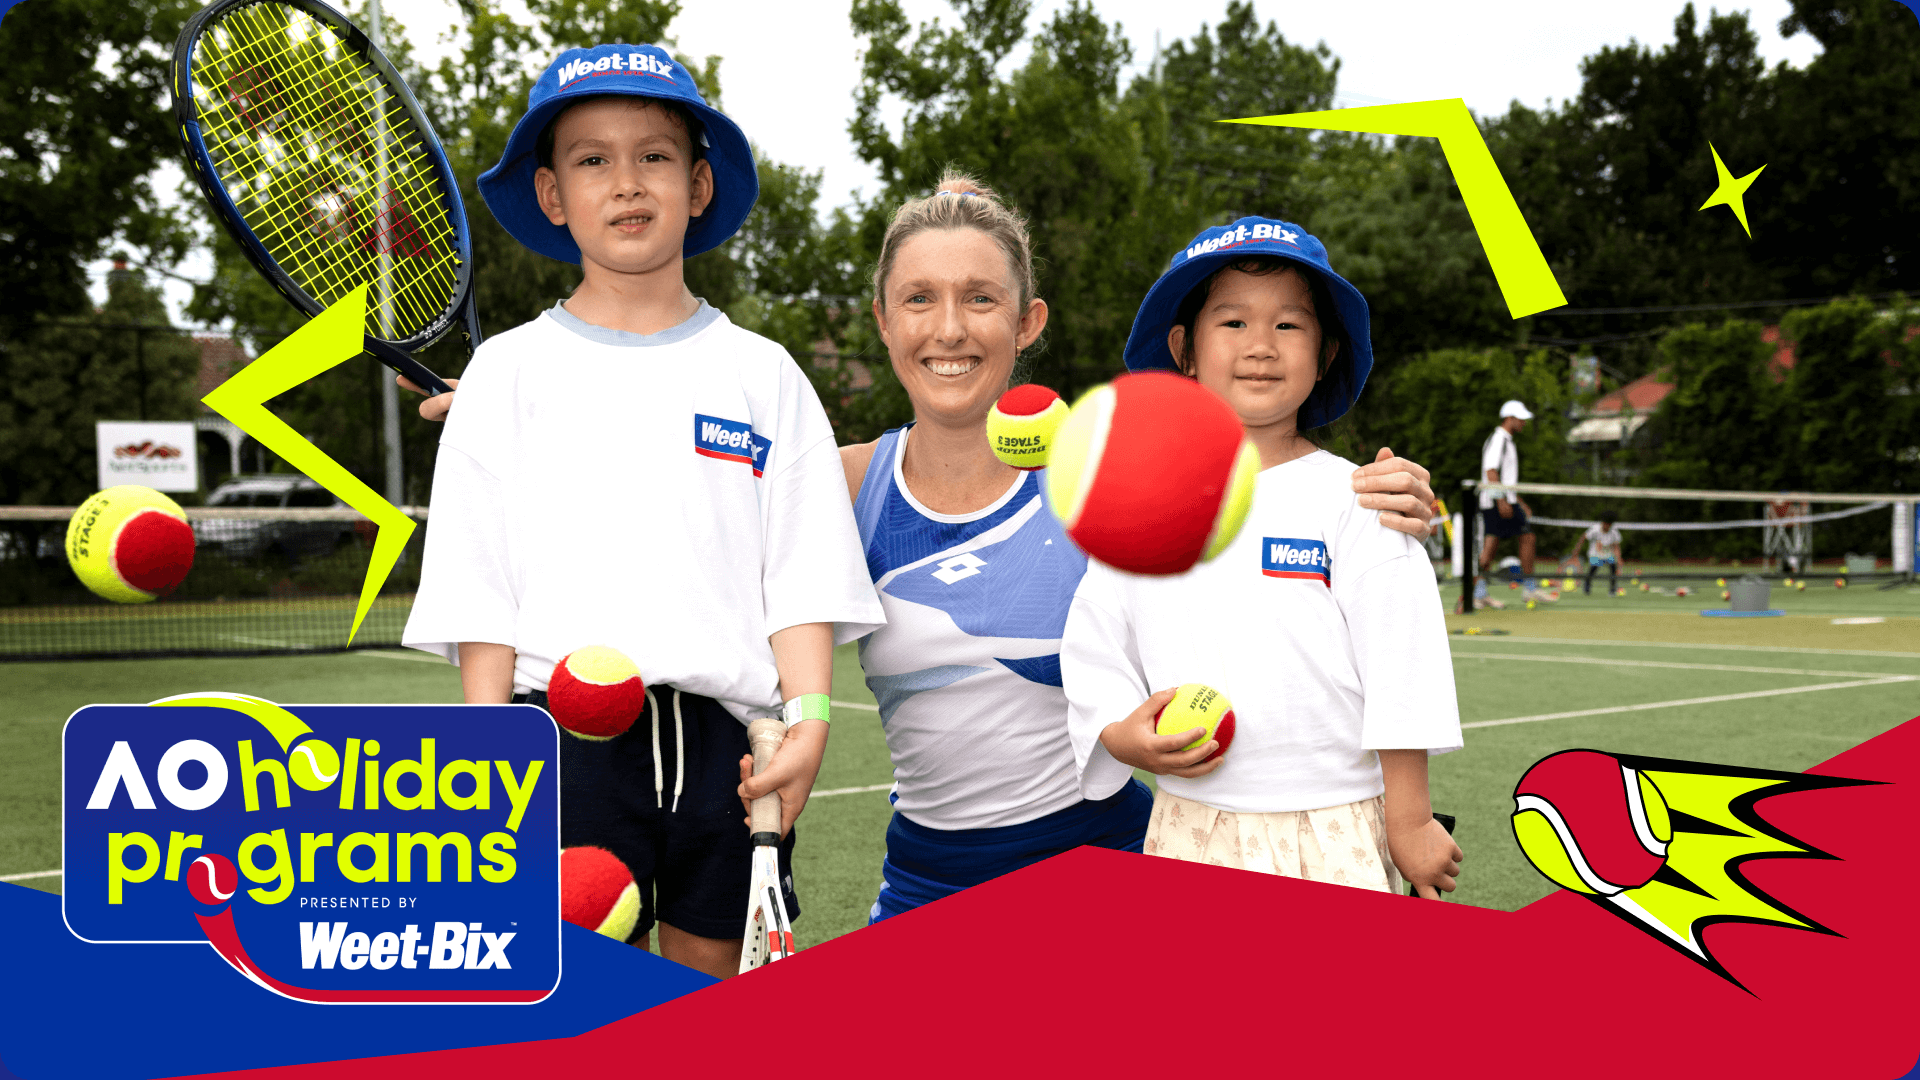 Photo of Storm Sanders with Weetbix kids at a tennis court